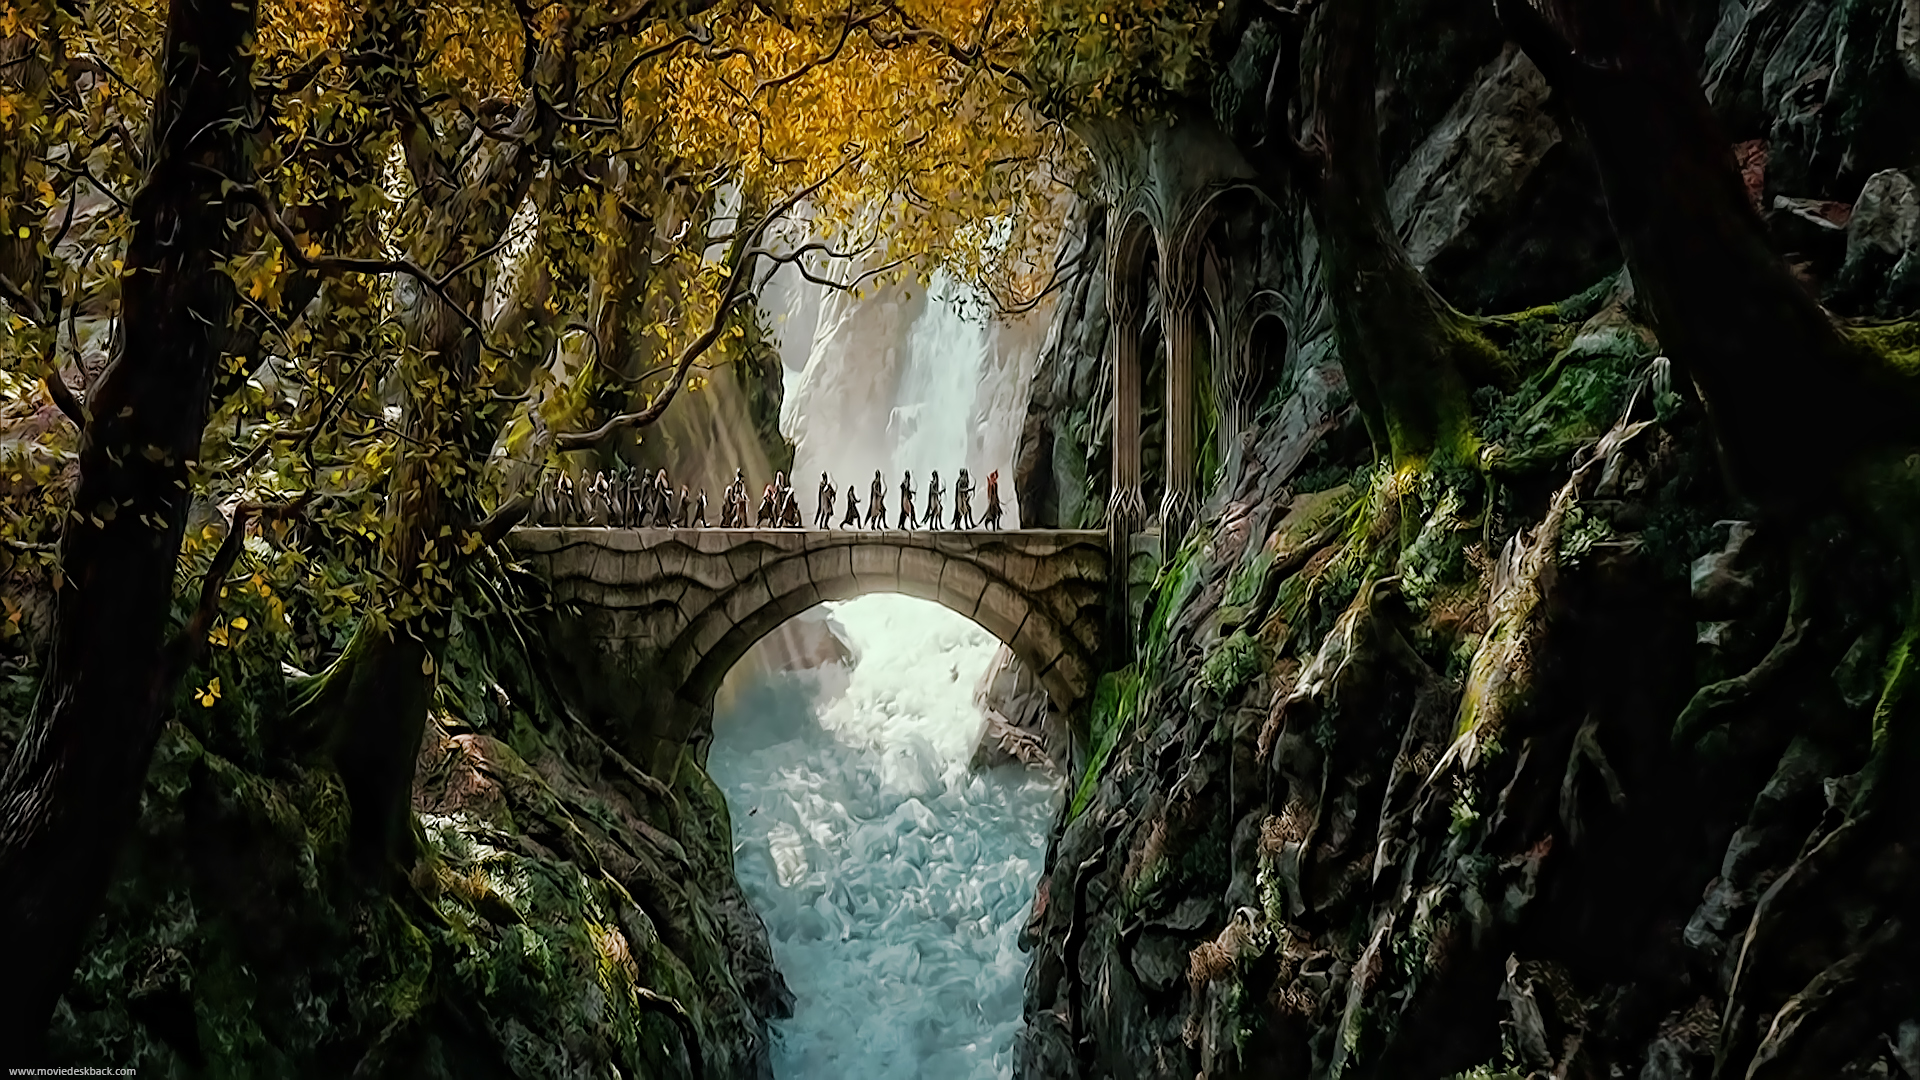 movie, the hobbit: the desolation of smaug, the lord of the rings